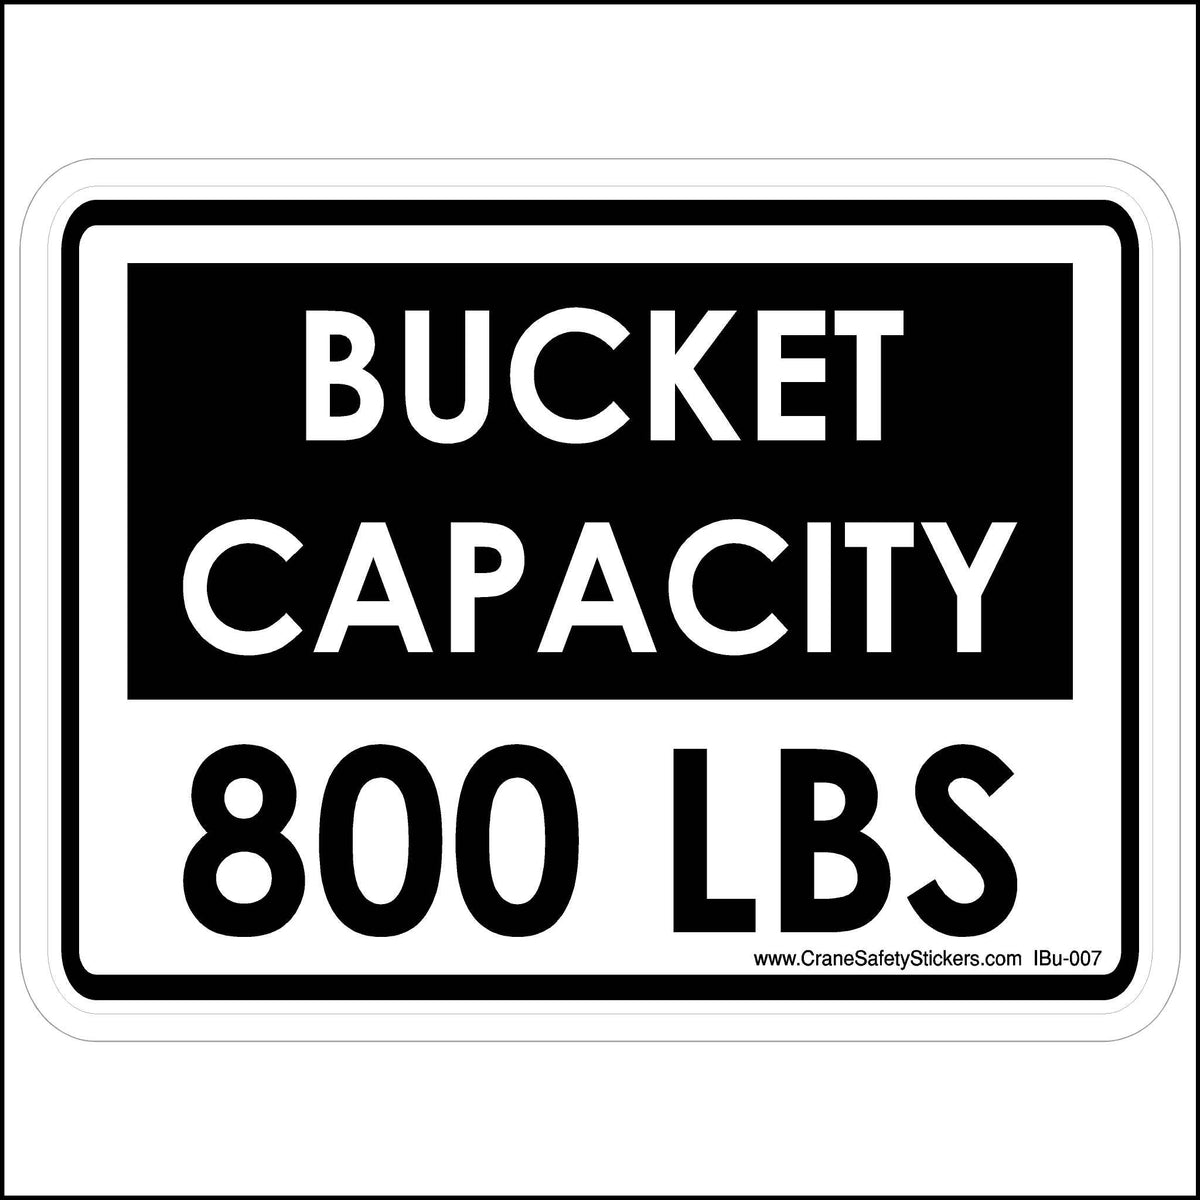 This Bucket Capacity 800 Lbs Sticker For Bucket Trucks Is Printed With. Bucket Capacity 800 LBS.